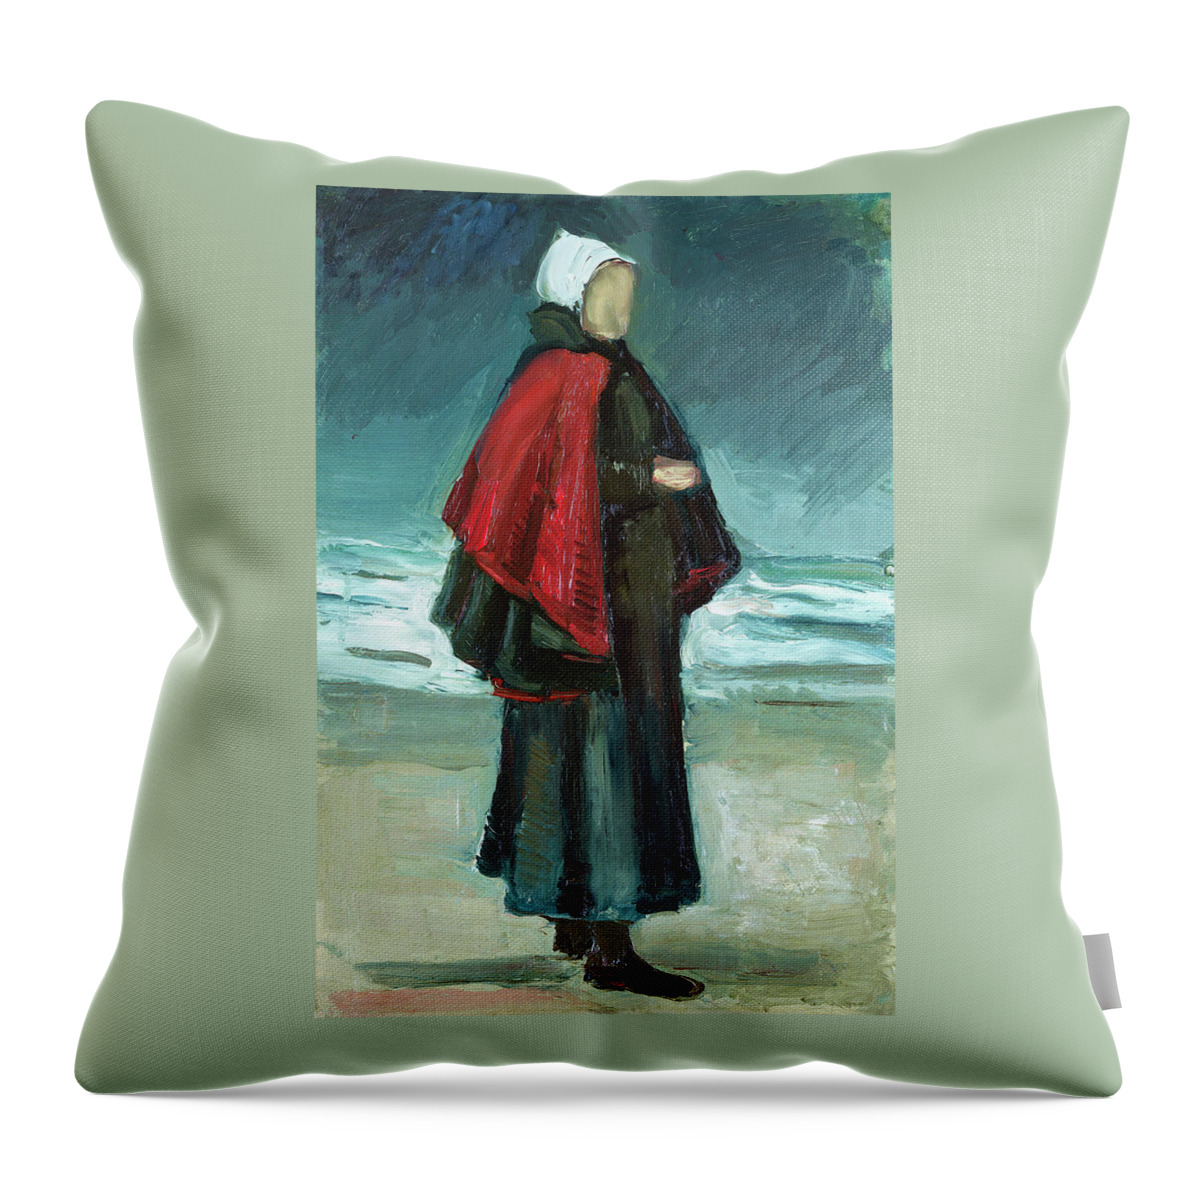 Fisherman's Wife Throw Pillow featuring the painting Fisherman's Wife by Vincent van Gogh 1883 by Vincent van Gogh